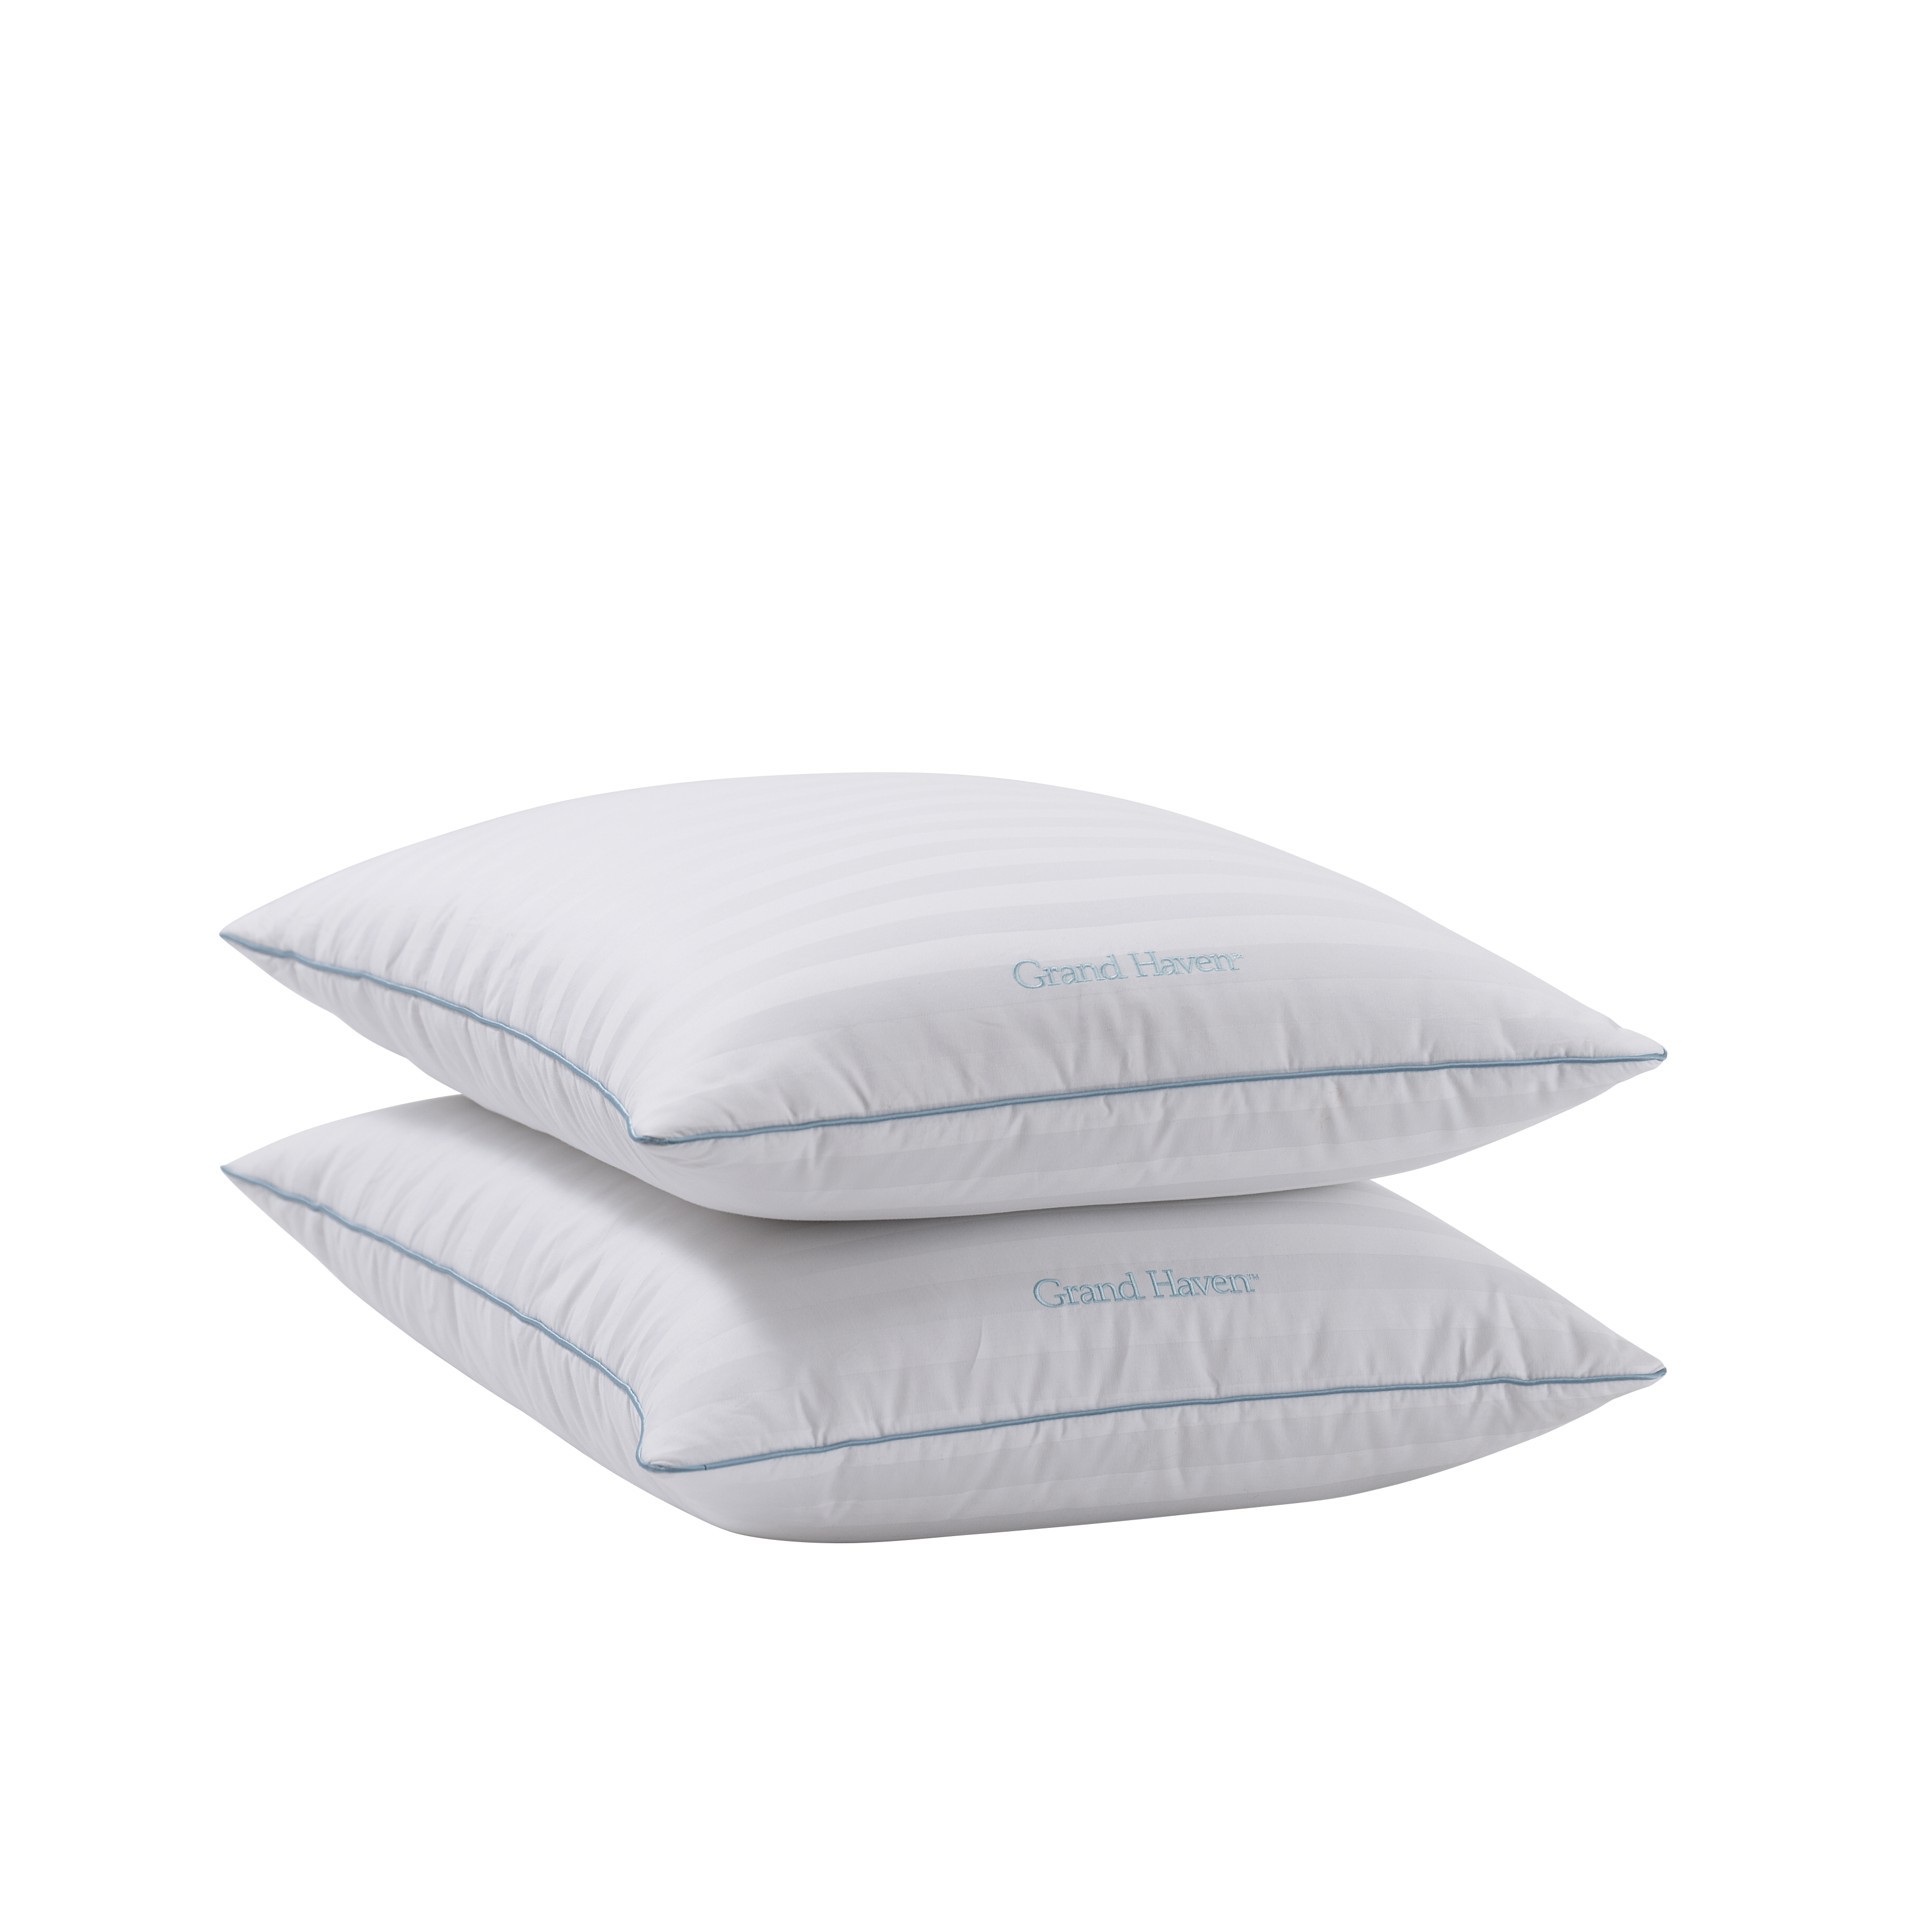 slide 1 of 1, Allied Home Llc Grand Haven Dream Surround Pillow, 2-Pack, 1 ct